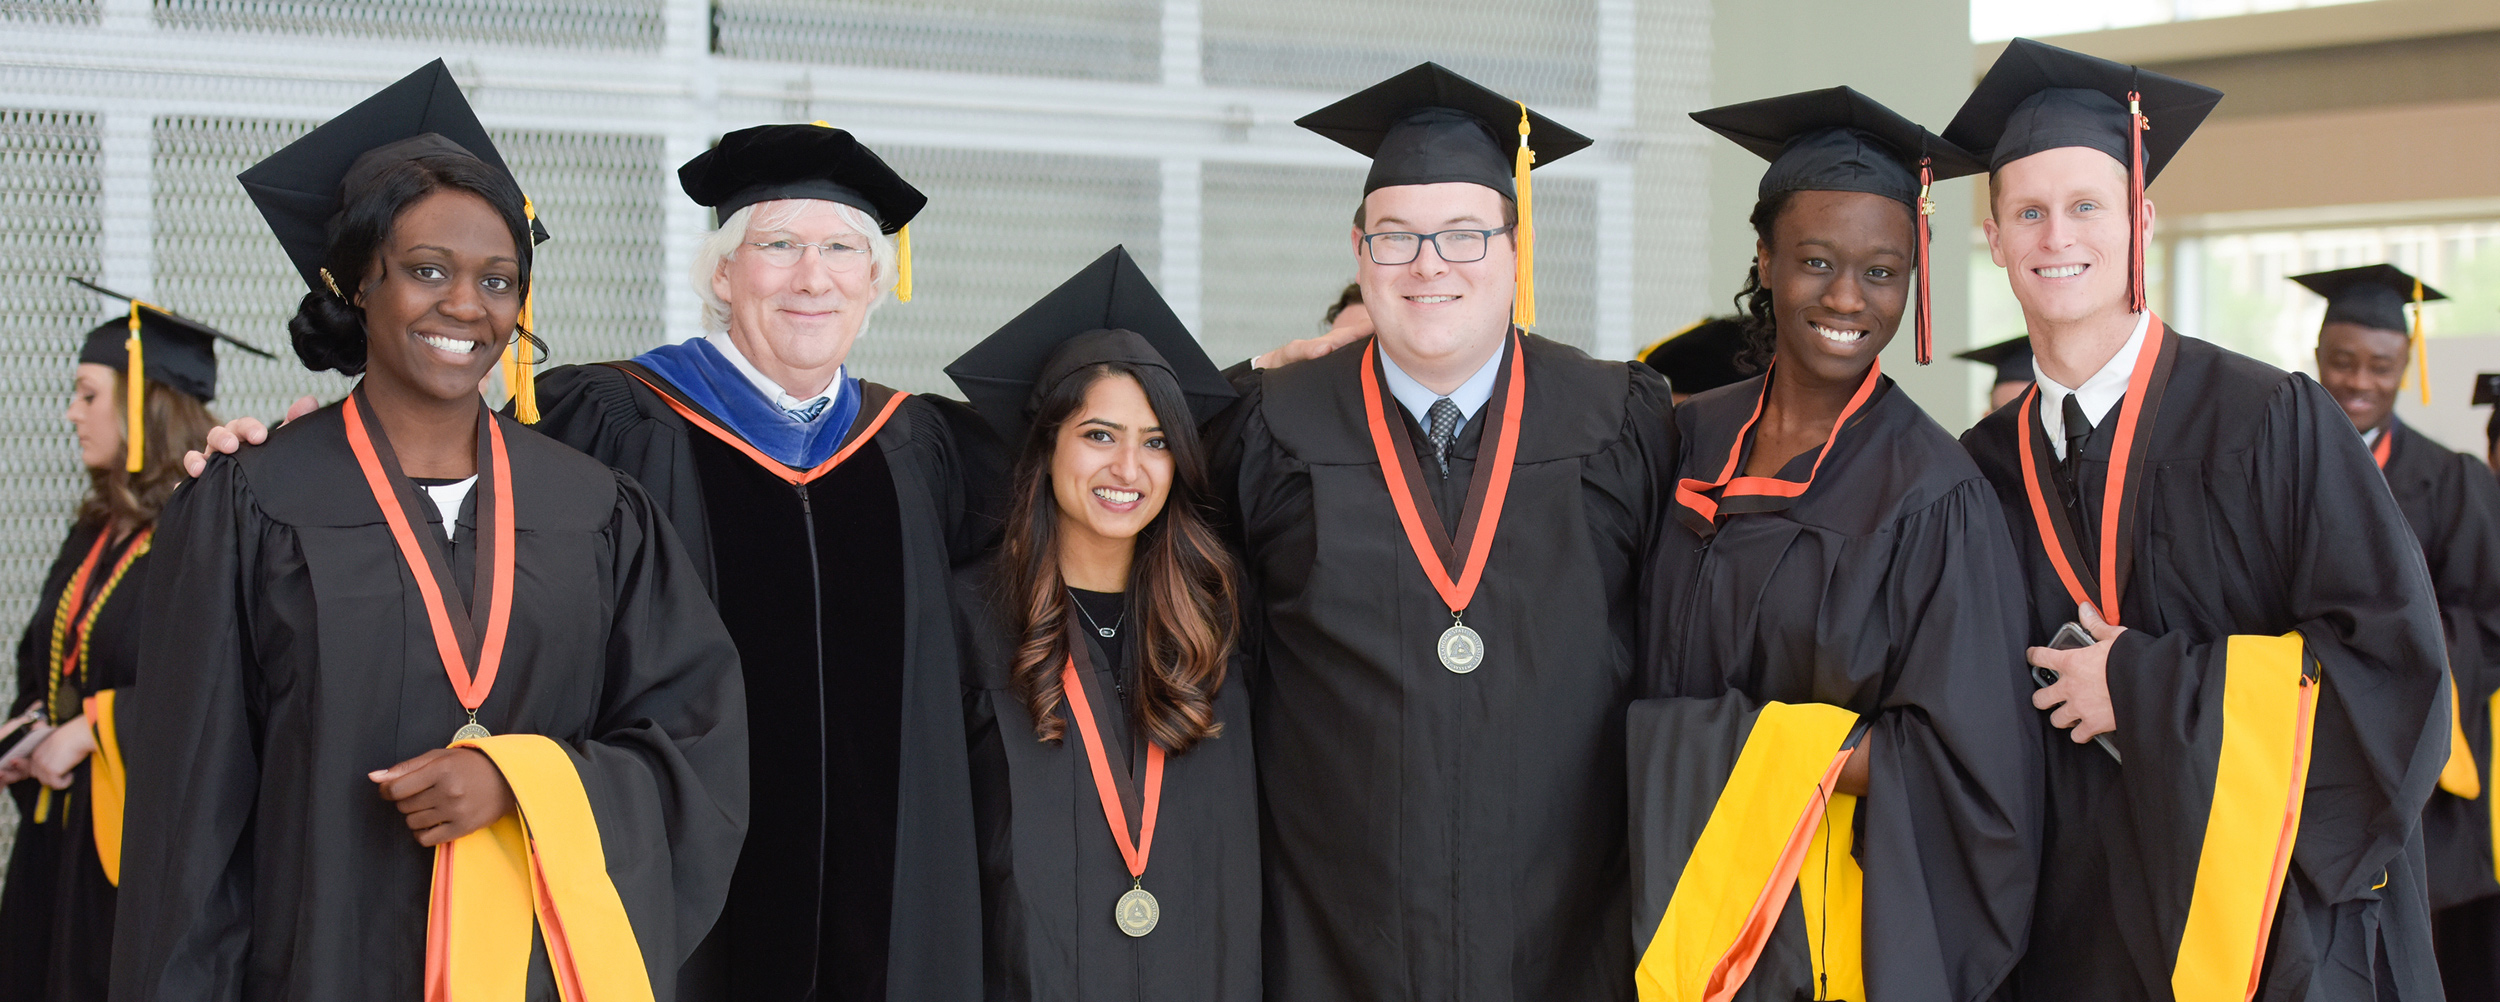 Graduate students stand together following their commencement ceremony in 2018.